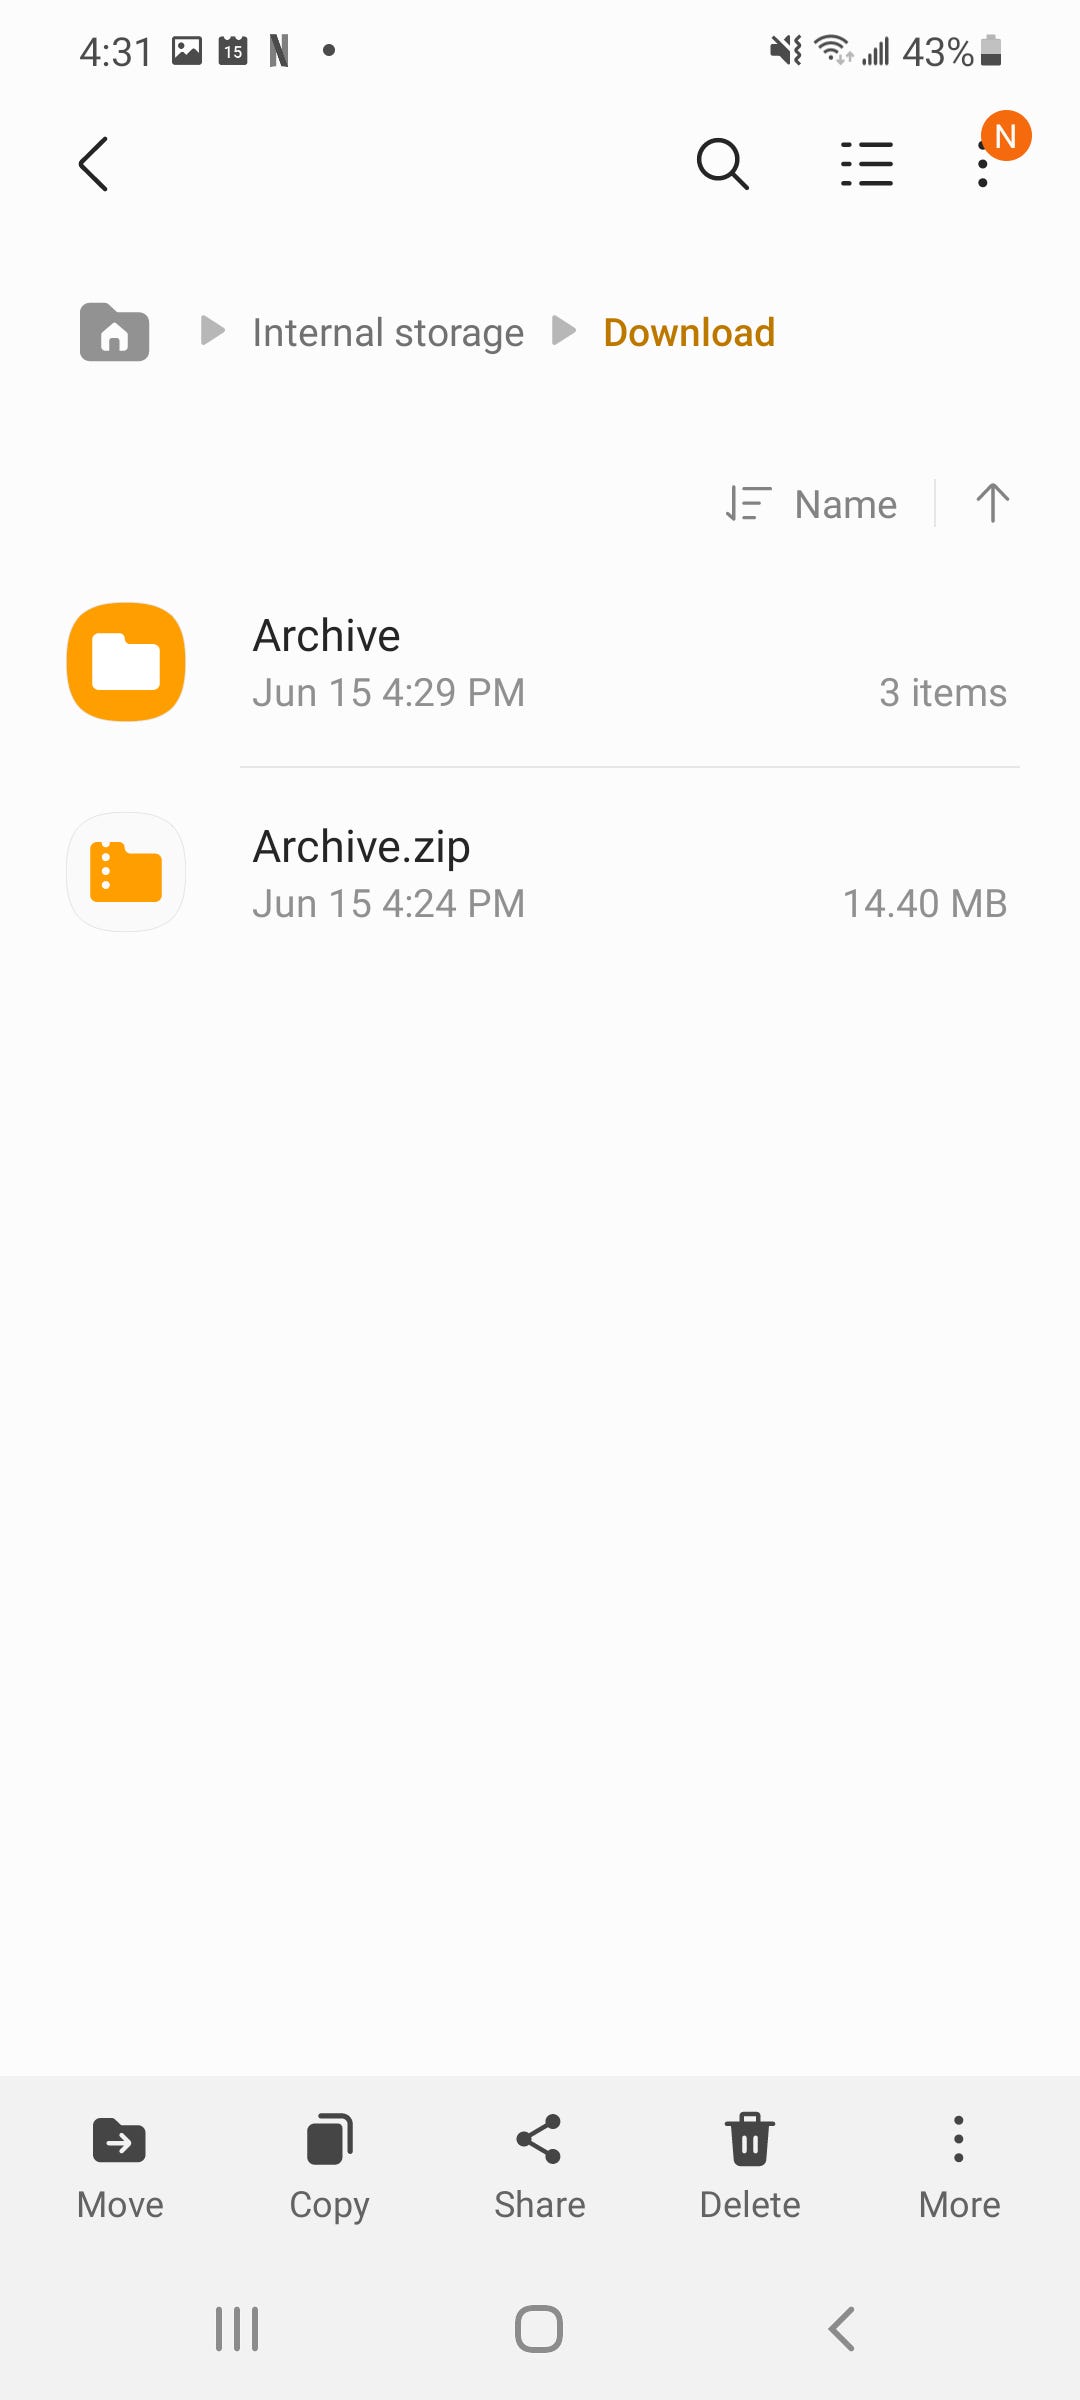 samsung android files app, with two files visible: a ZIP file called "Archive.zip" and a folder called "Archive."